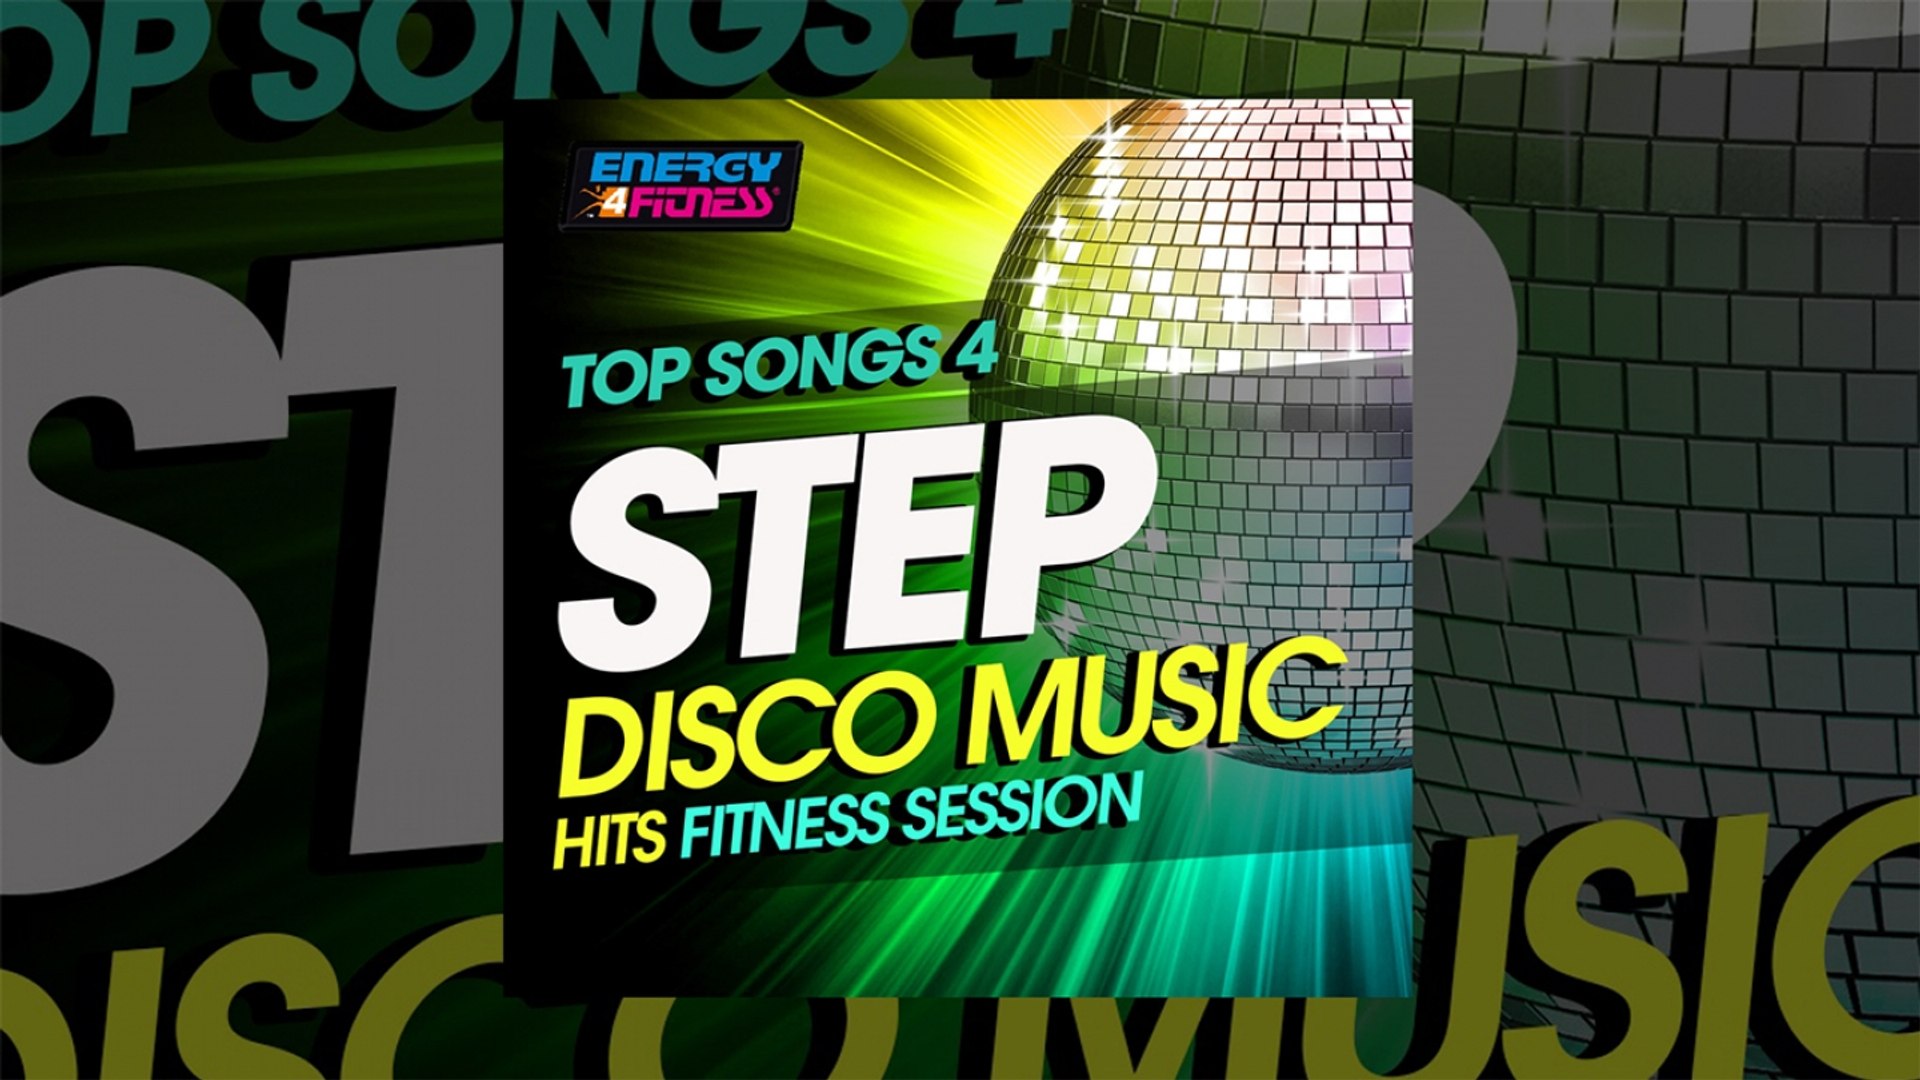 E4F - Top Songs For Step Disco Music Hits Fitness Session - Fitness & Music 2019